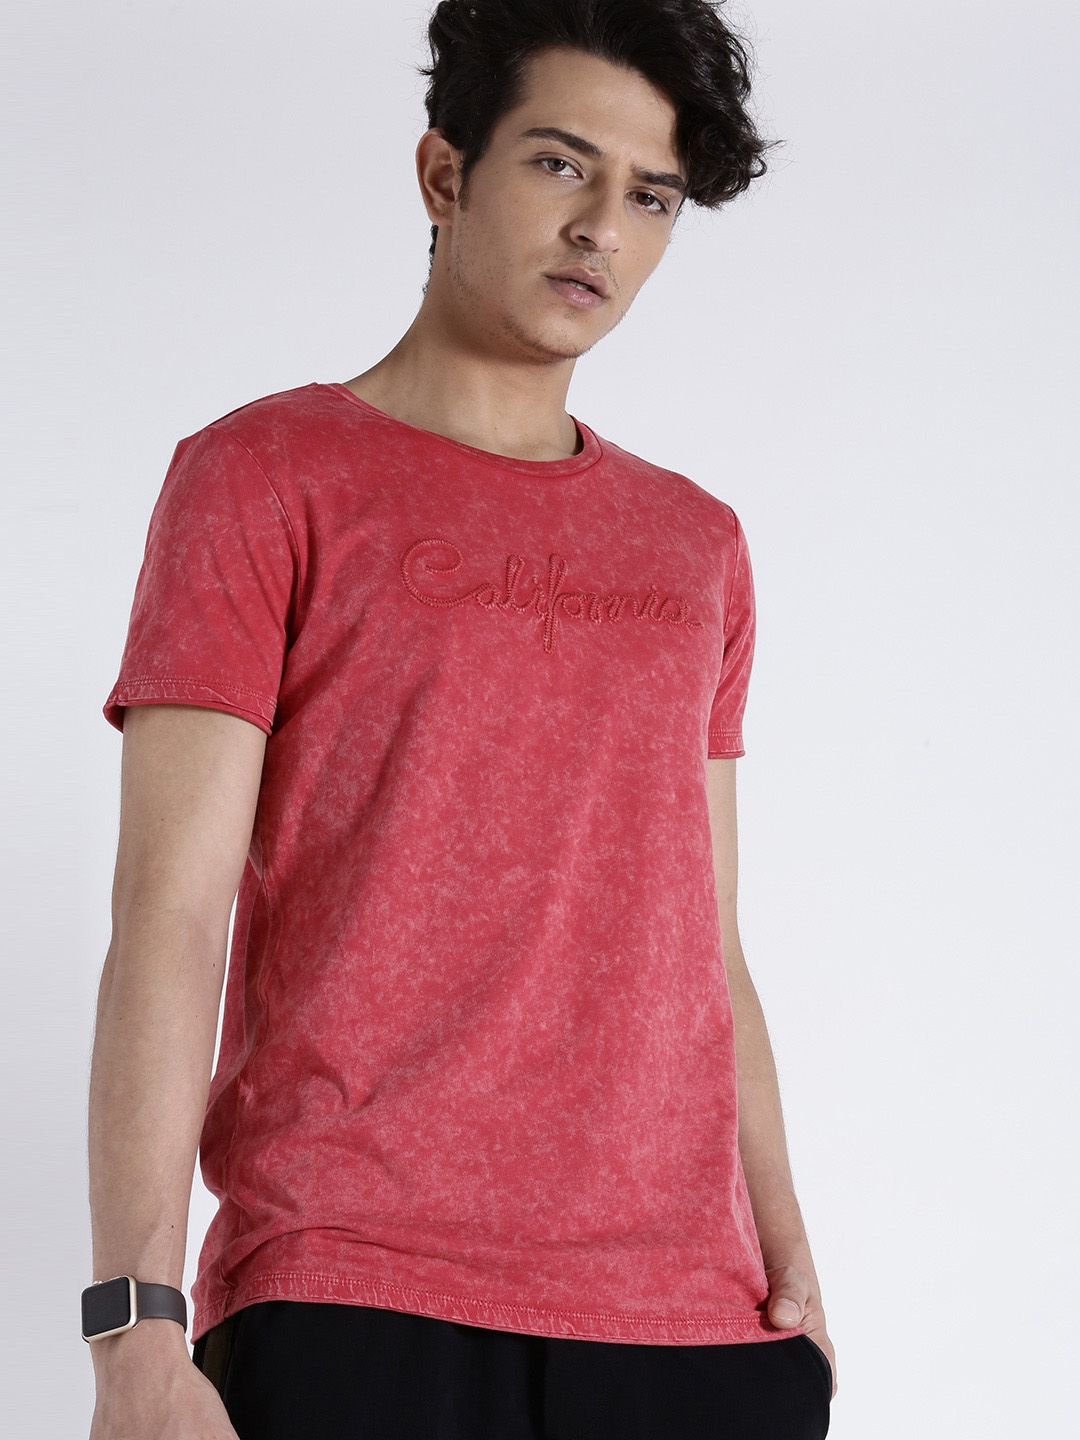 Buy S.Oliver Men - for Solid Round Red Shirt Men T Tshirts | Myntra Neck 1847748